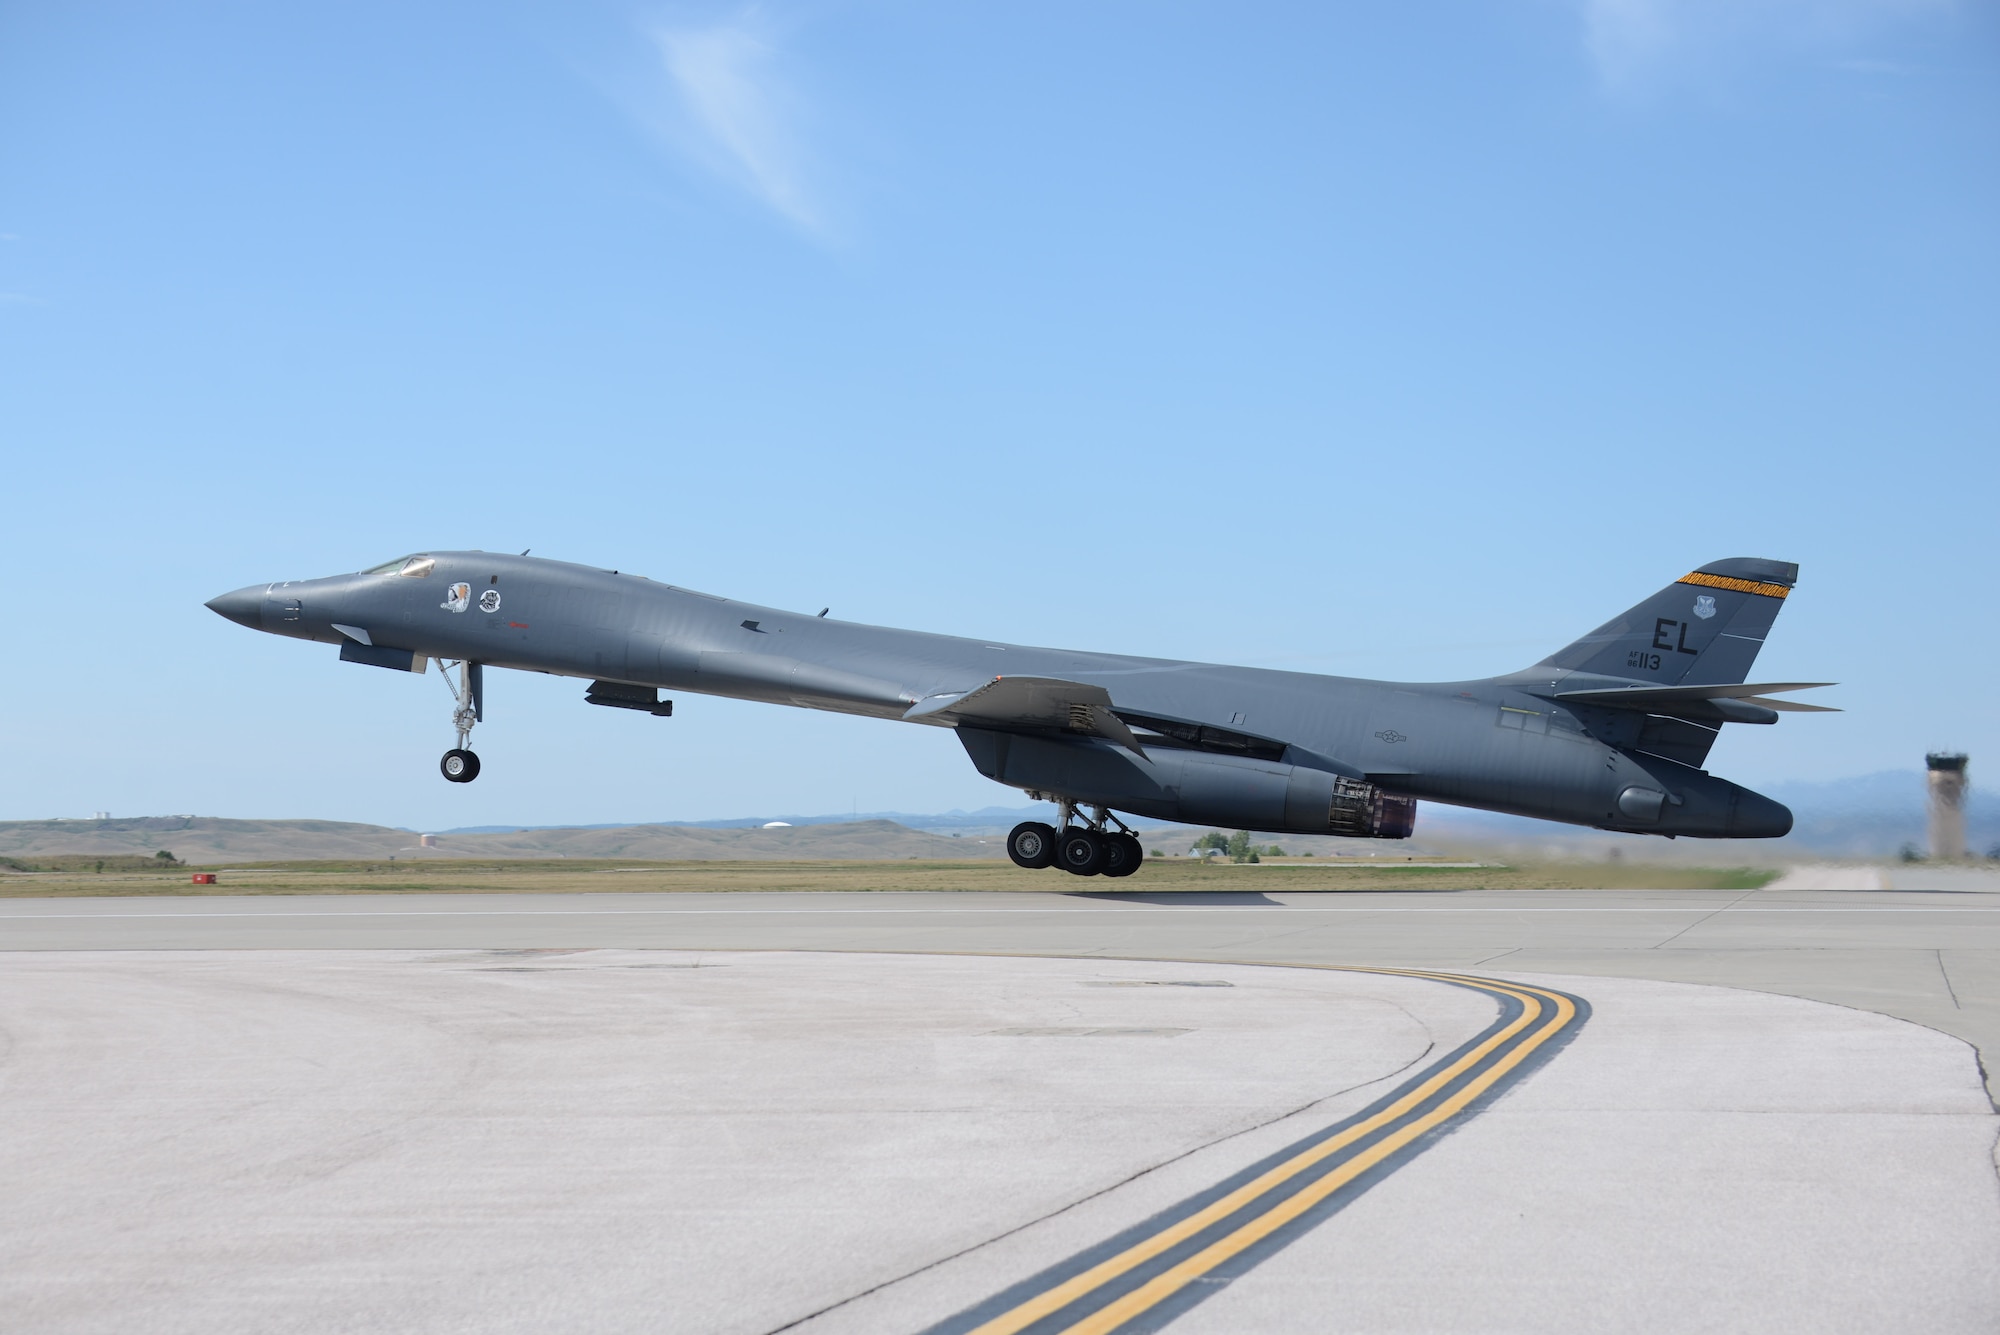 A B-1 bomber departs at Ellsworth Air Force Base (AFB), S.D., Aug. 5, 2016, as part of a deployment to Andersen AFB, Guam. More than 300 Airmen from the 28th Bomb Wing have deployed to Andersen AFB, Guam, in support of U.S. Pacific Command’s continuous bomber presence mission. (U.S. Air Force photo by Airman 1st Class Sadie Colbert)